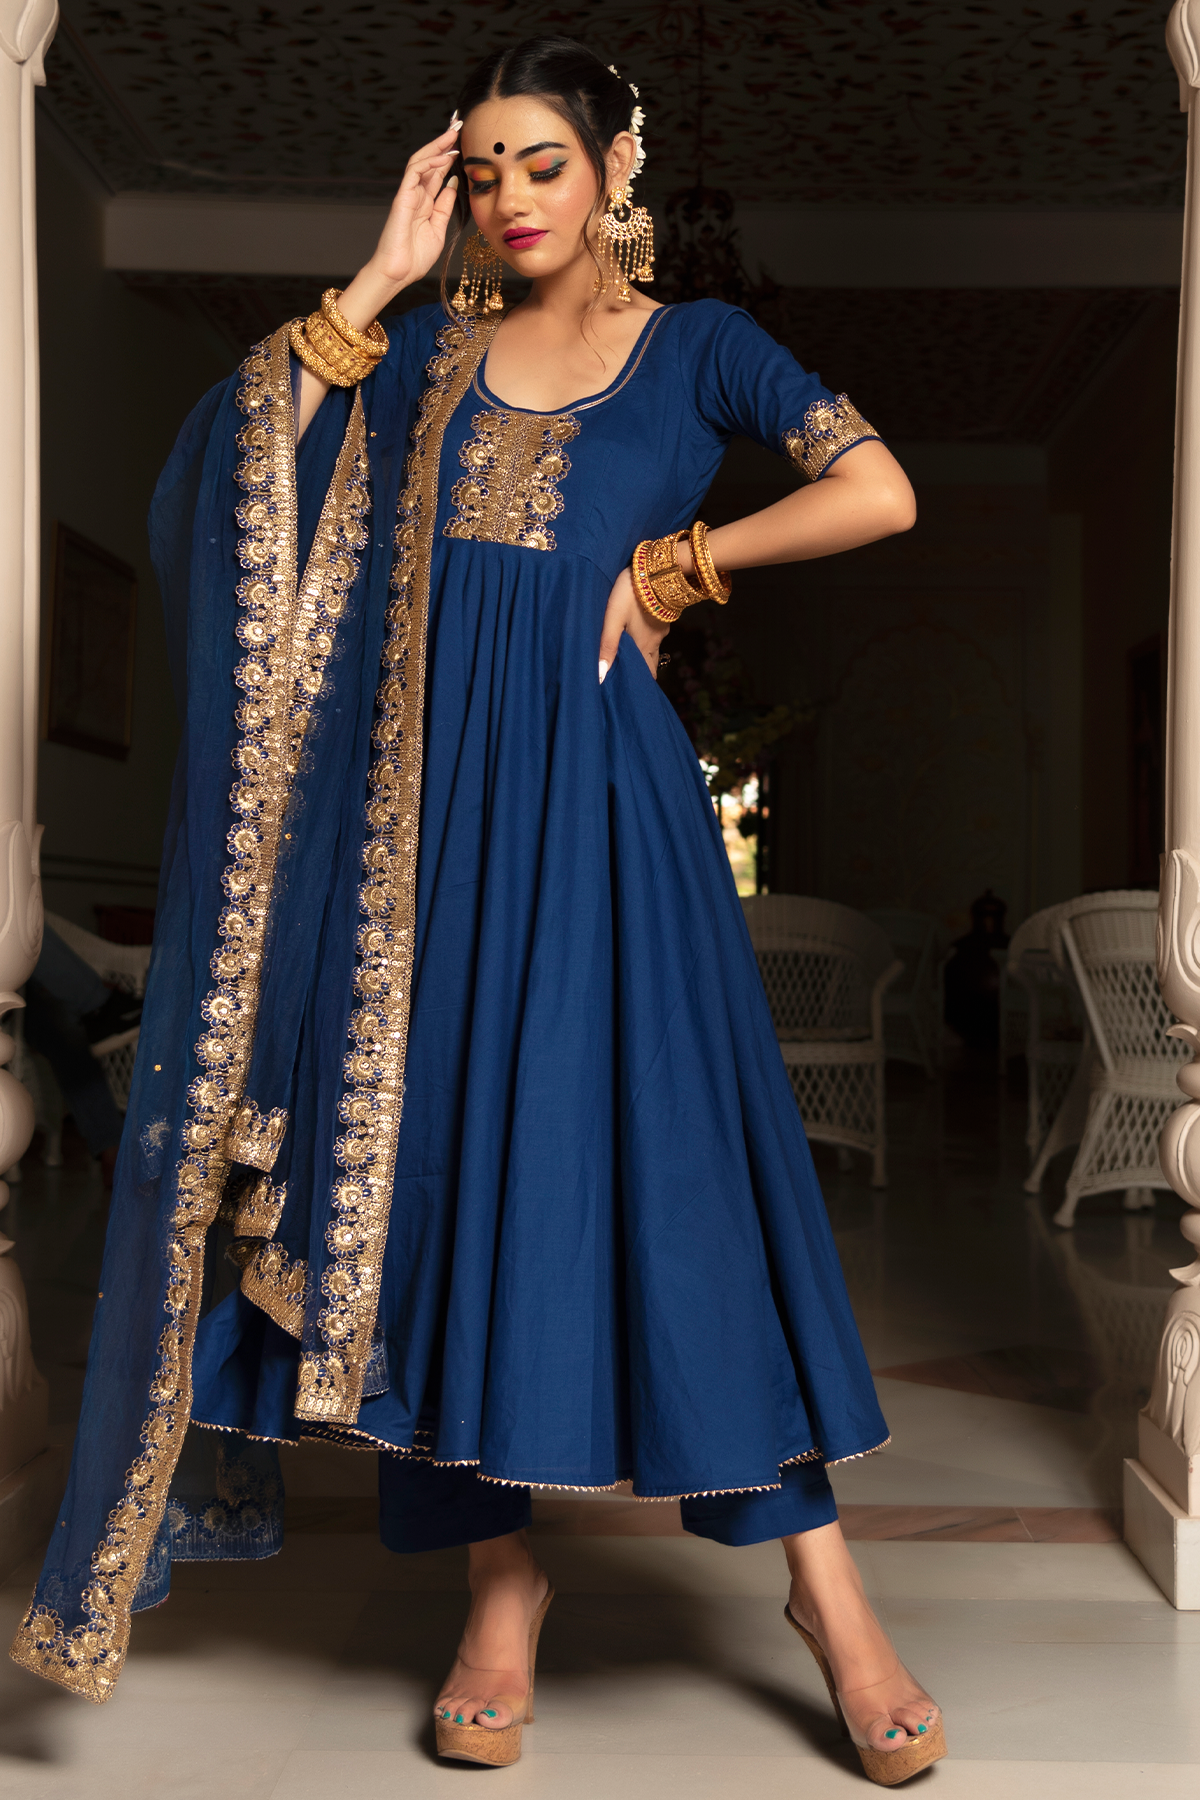 Discover more than 244 grand anarkali suits super hot